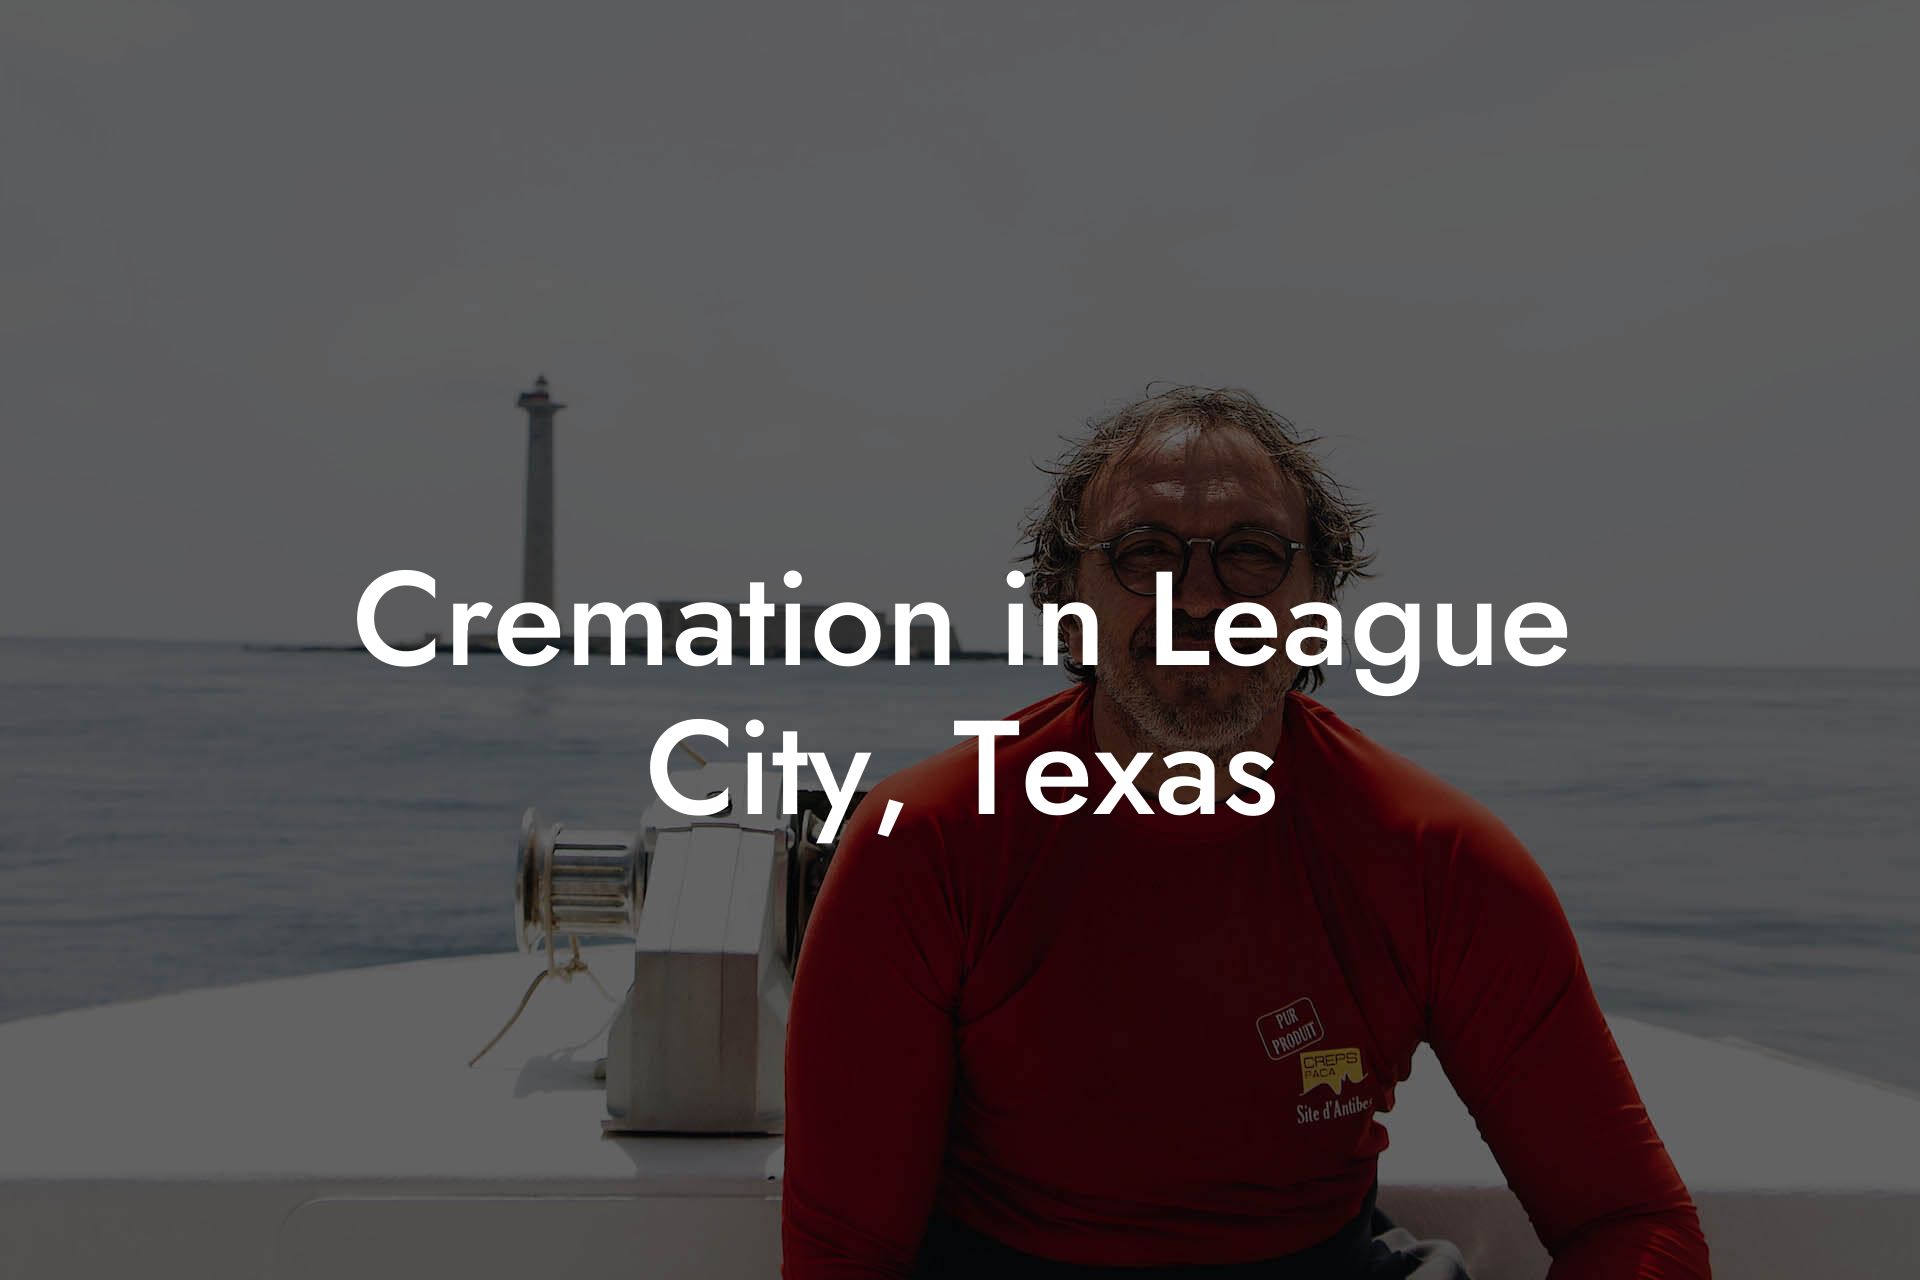 Cremation in League City, Texas